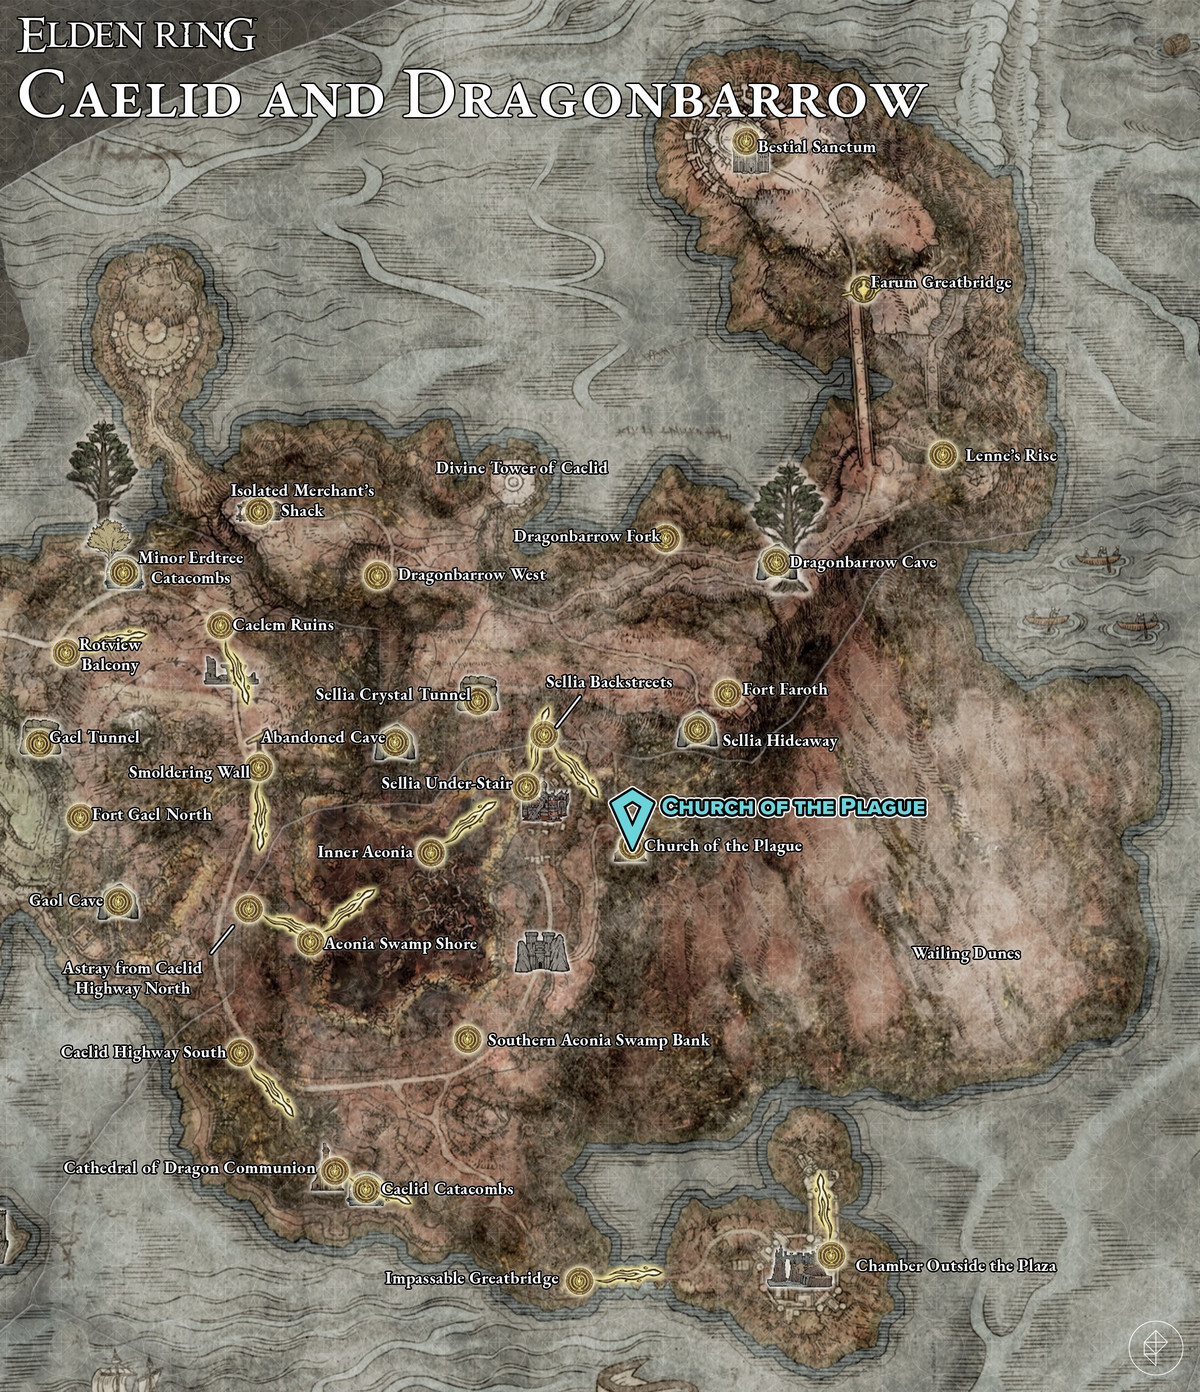 Map showing Caelid and Dragonbarrow Sacred Tear locations.